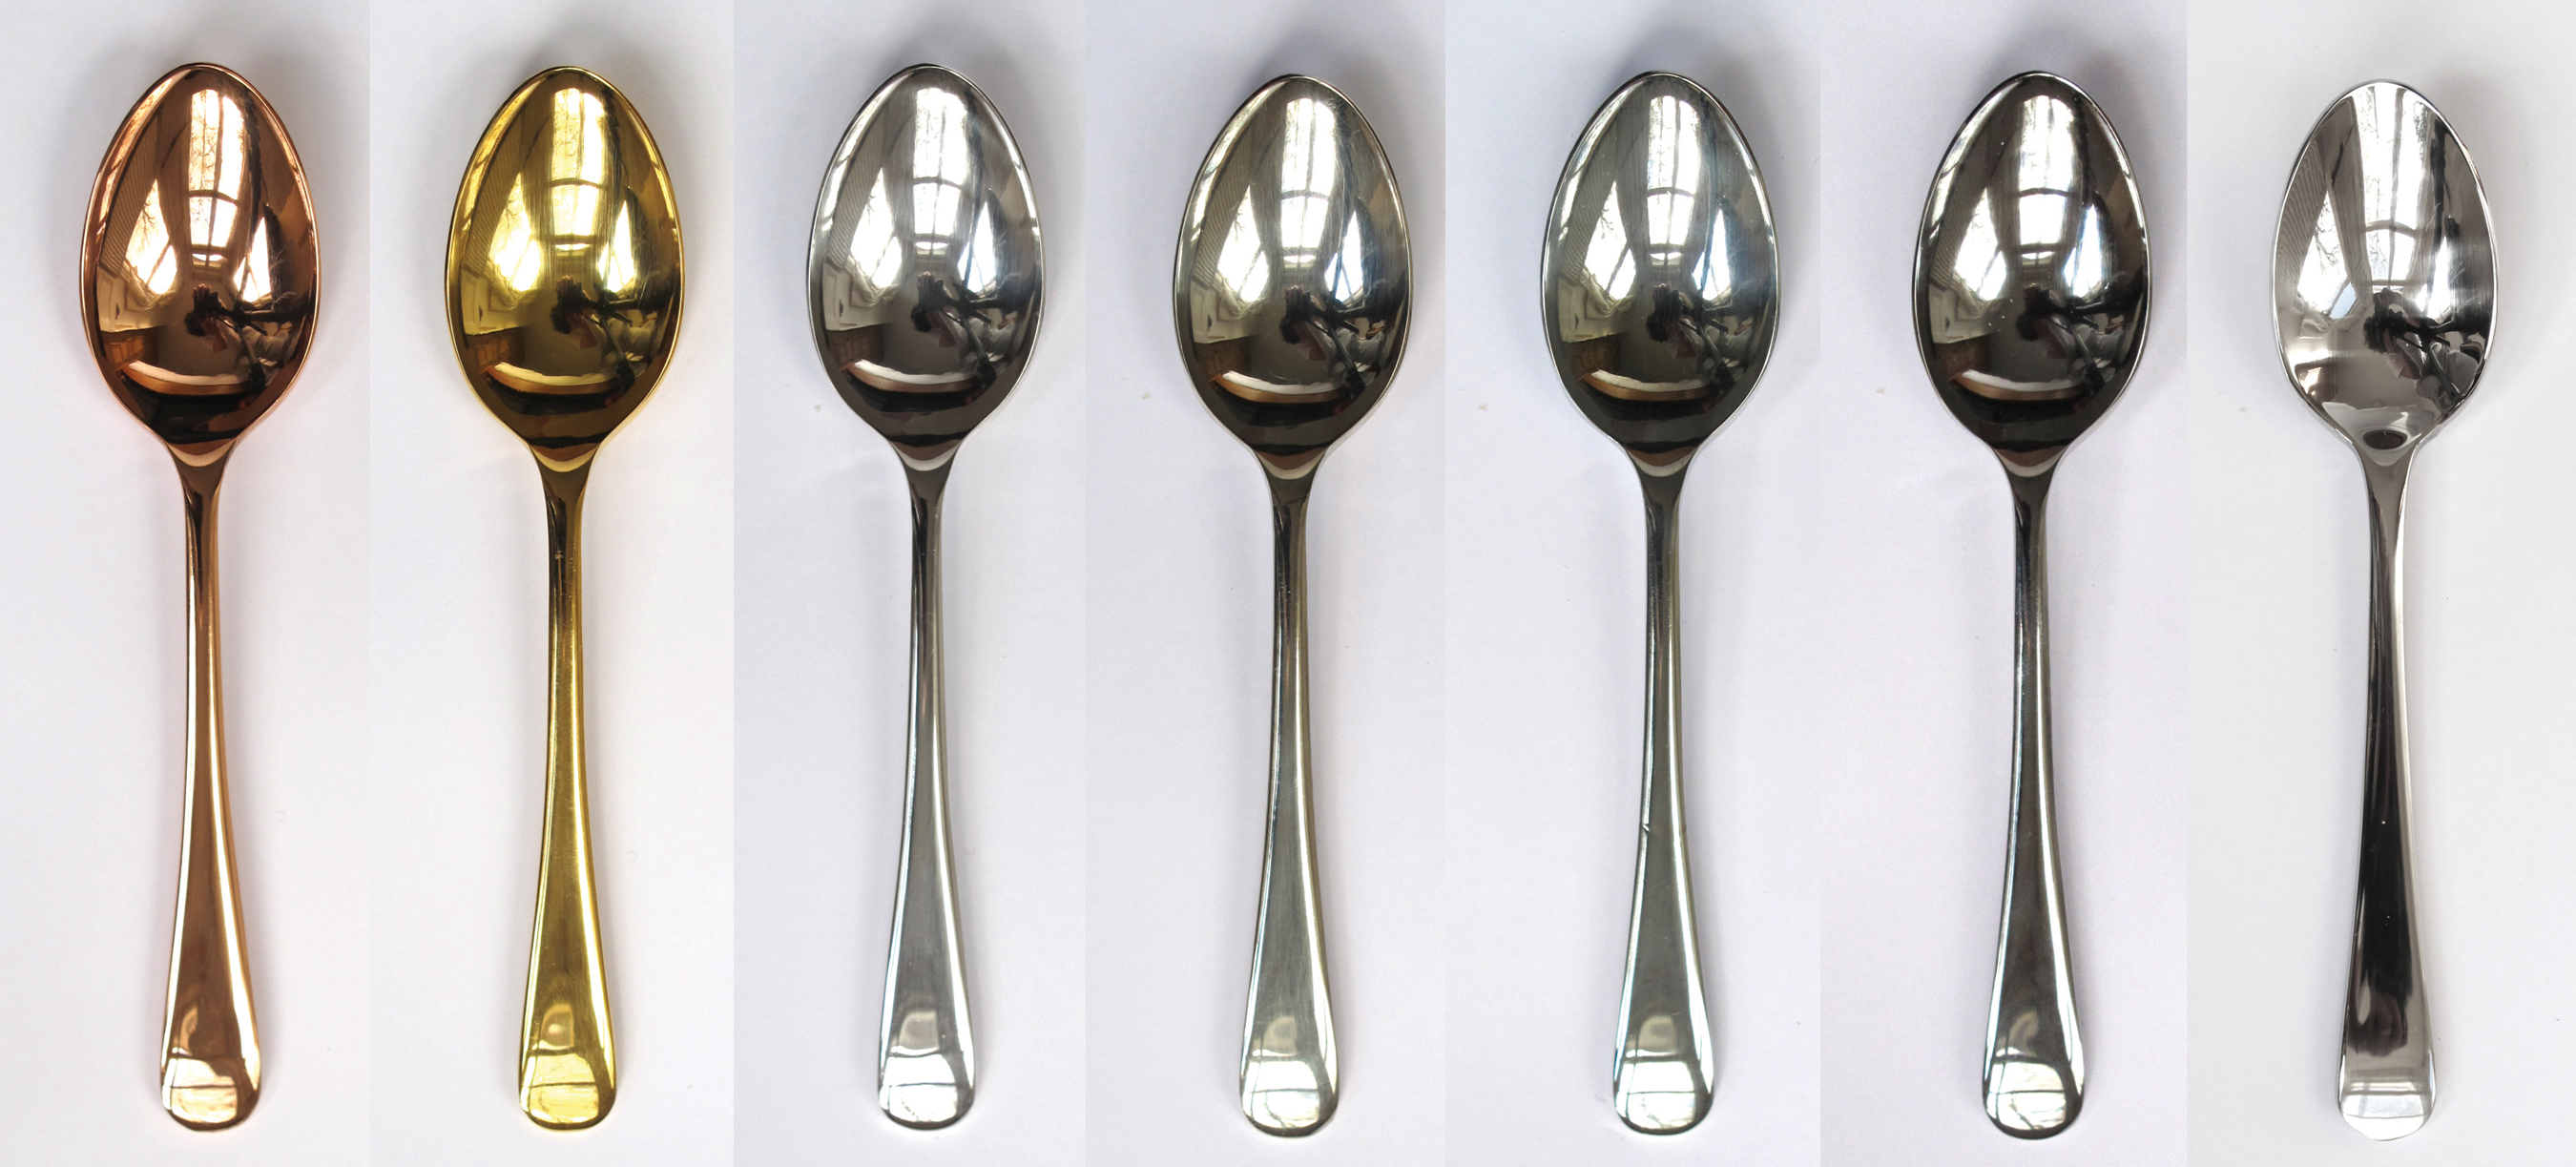 Double Ended Tasting Spoon by Club Chef